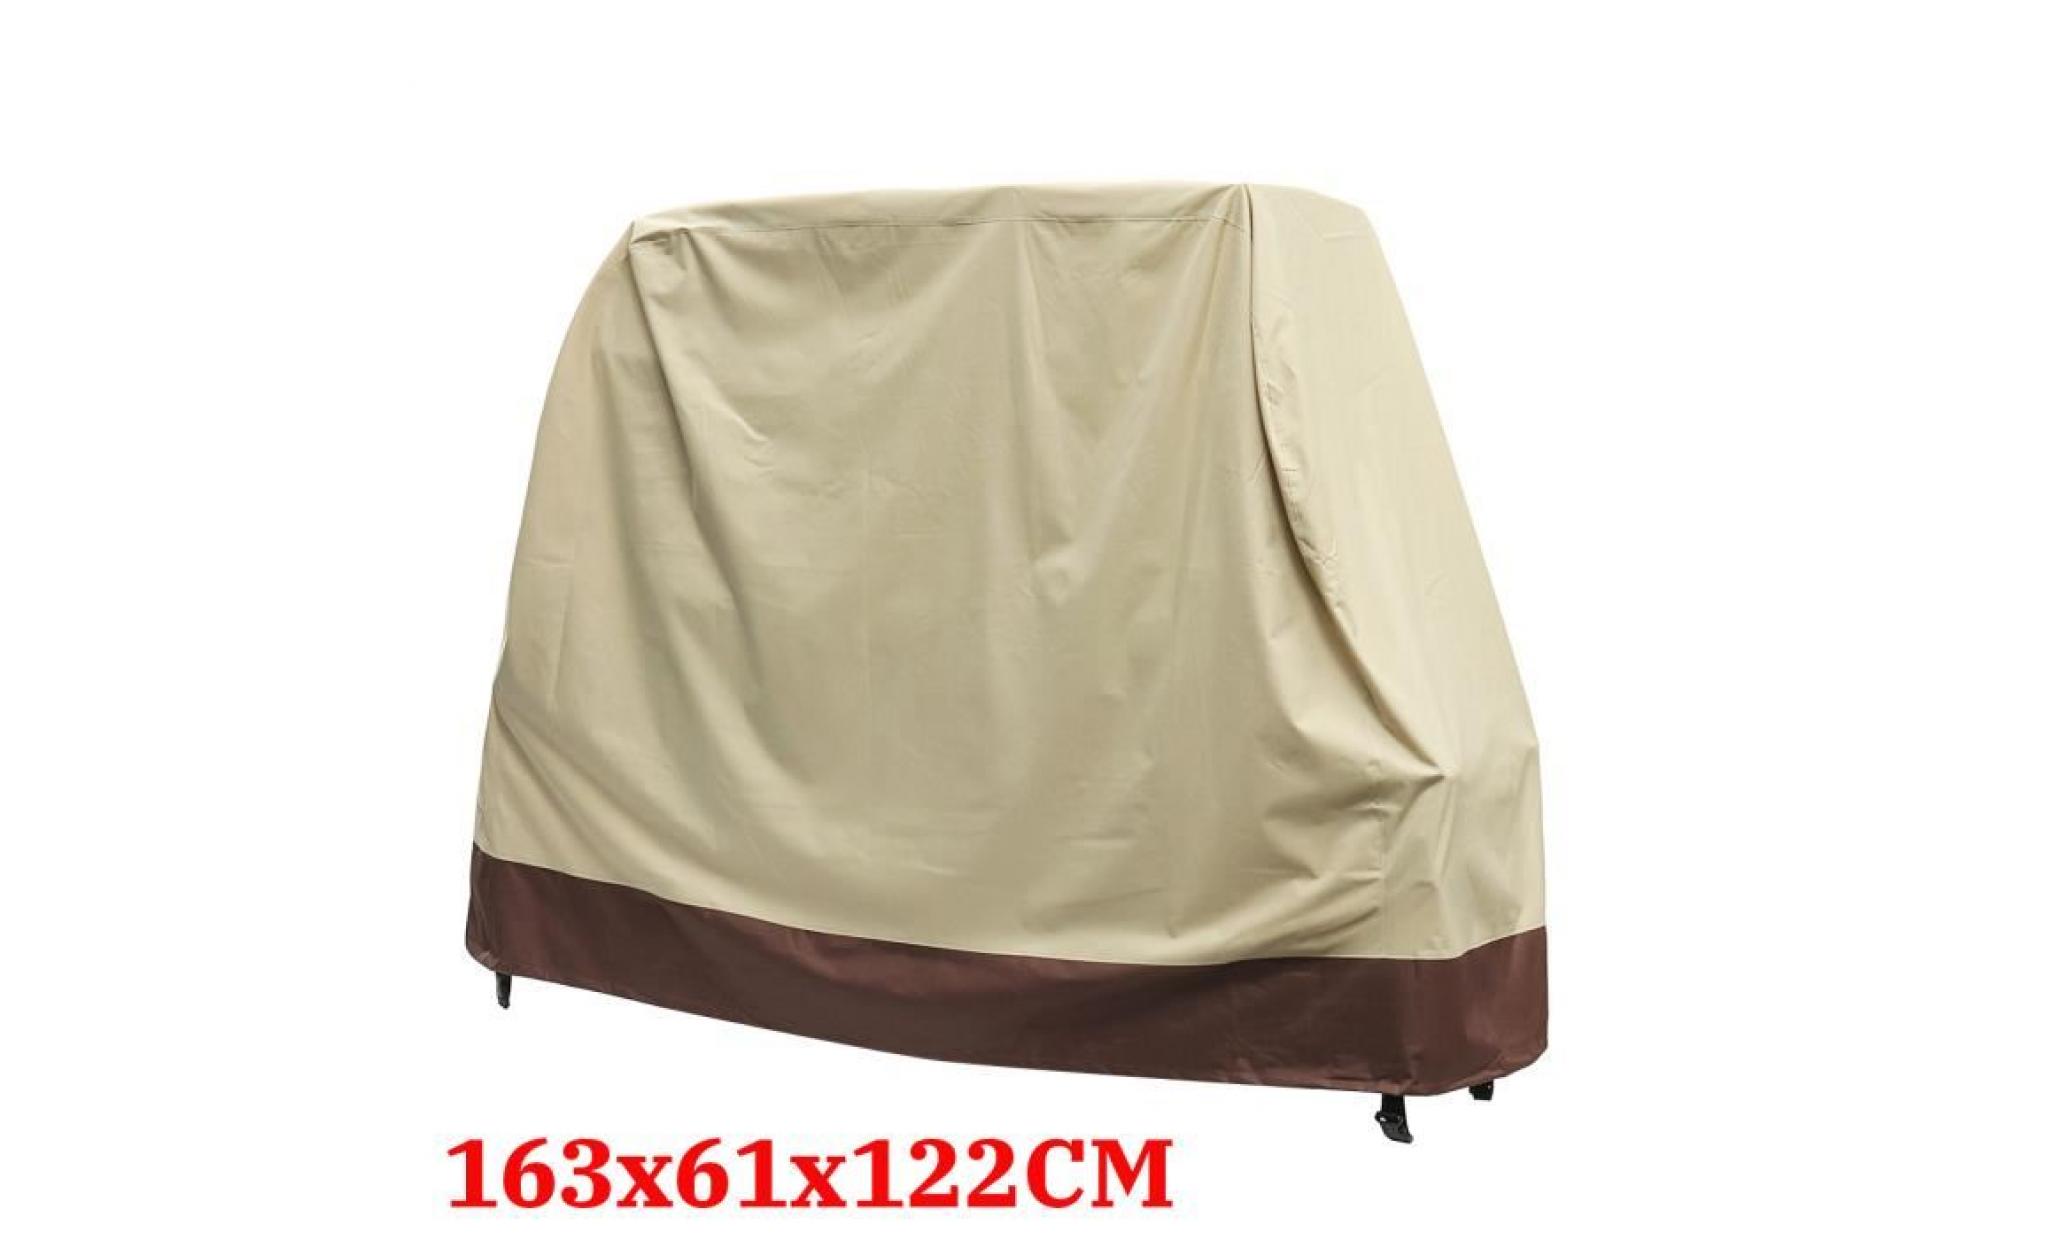 neufu jardin housse barbecue bâche couvre bbq grill protection imperméable 163x61x122cm